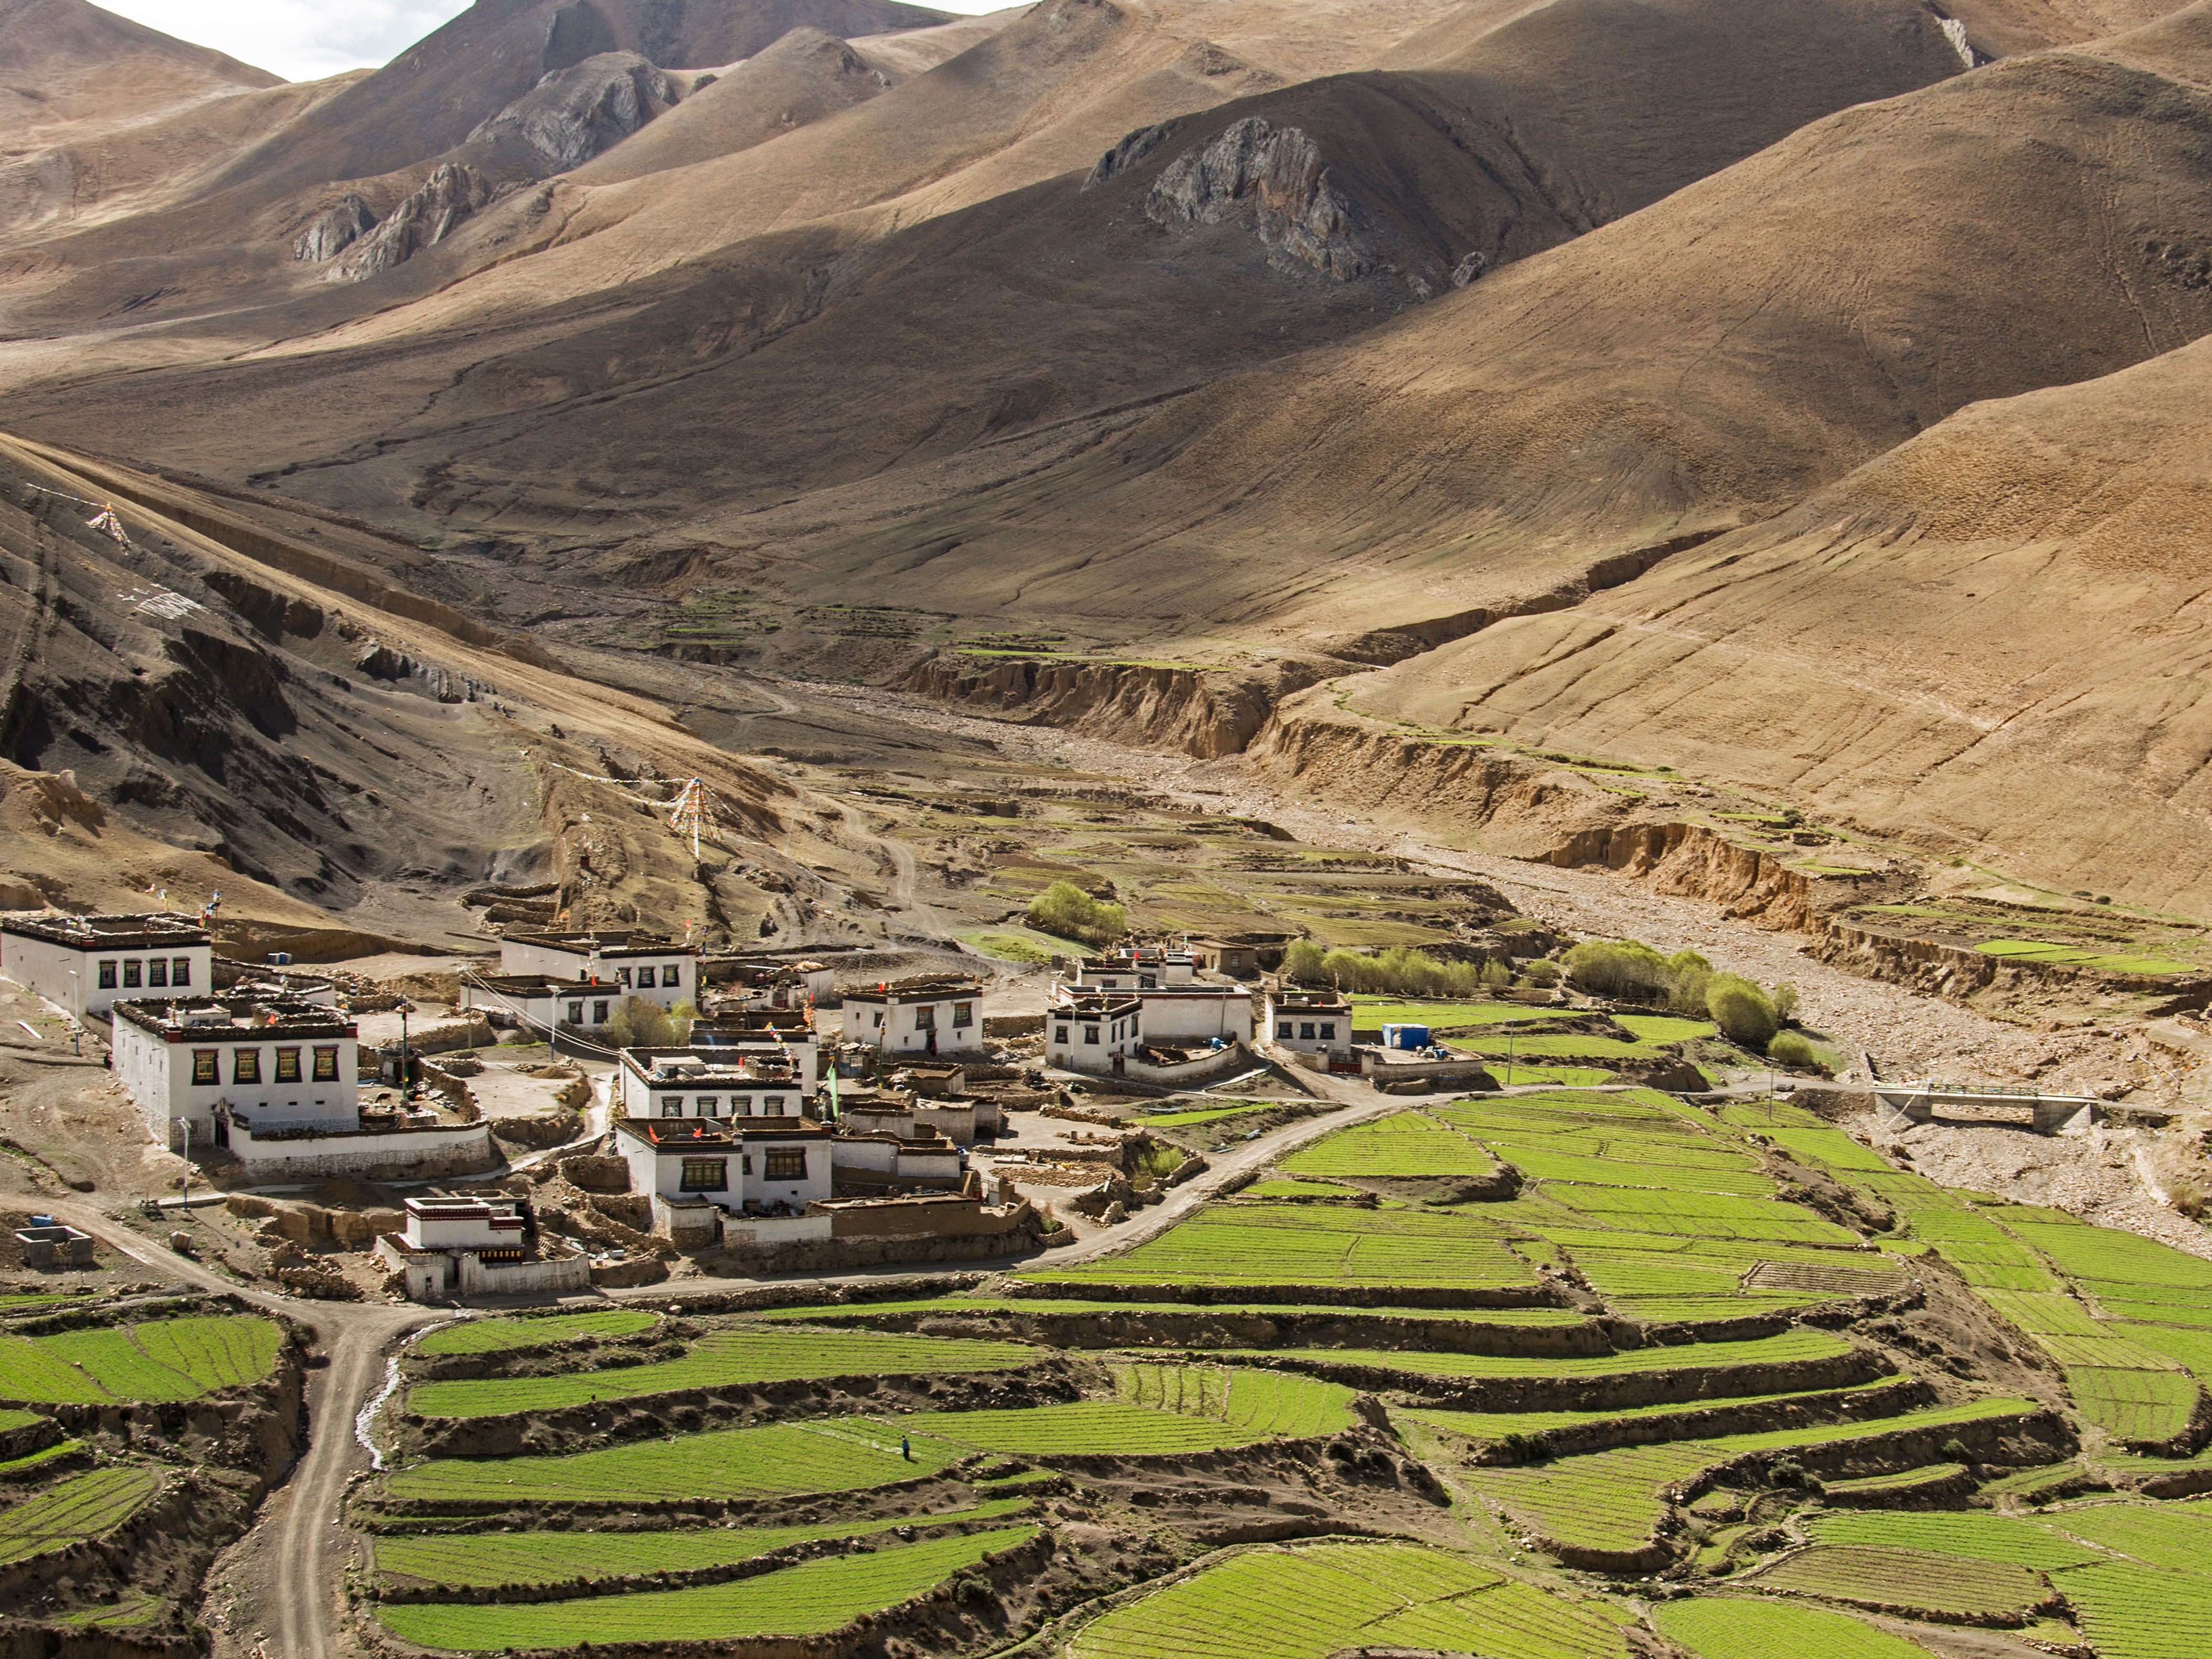 Villages along the way to Everest from Shigatse